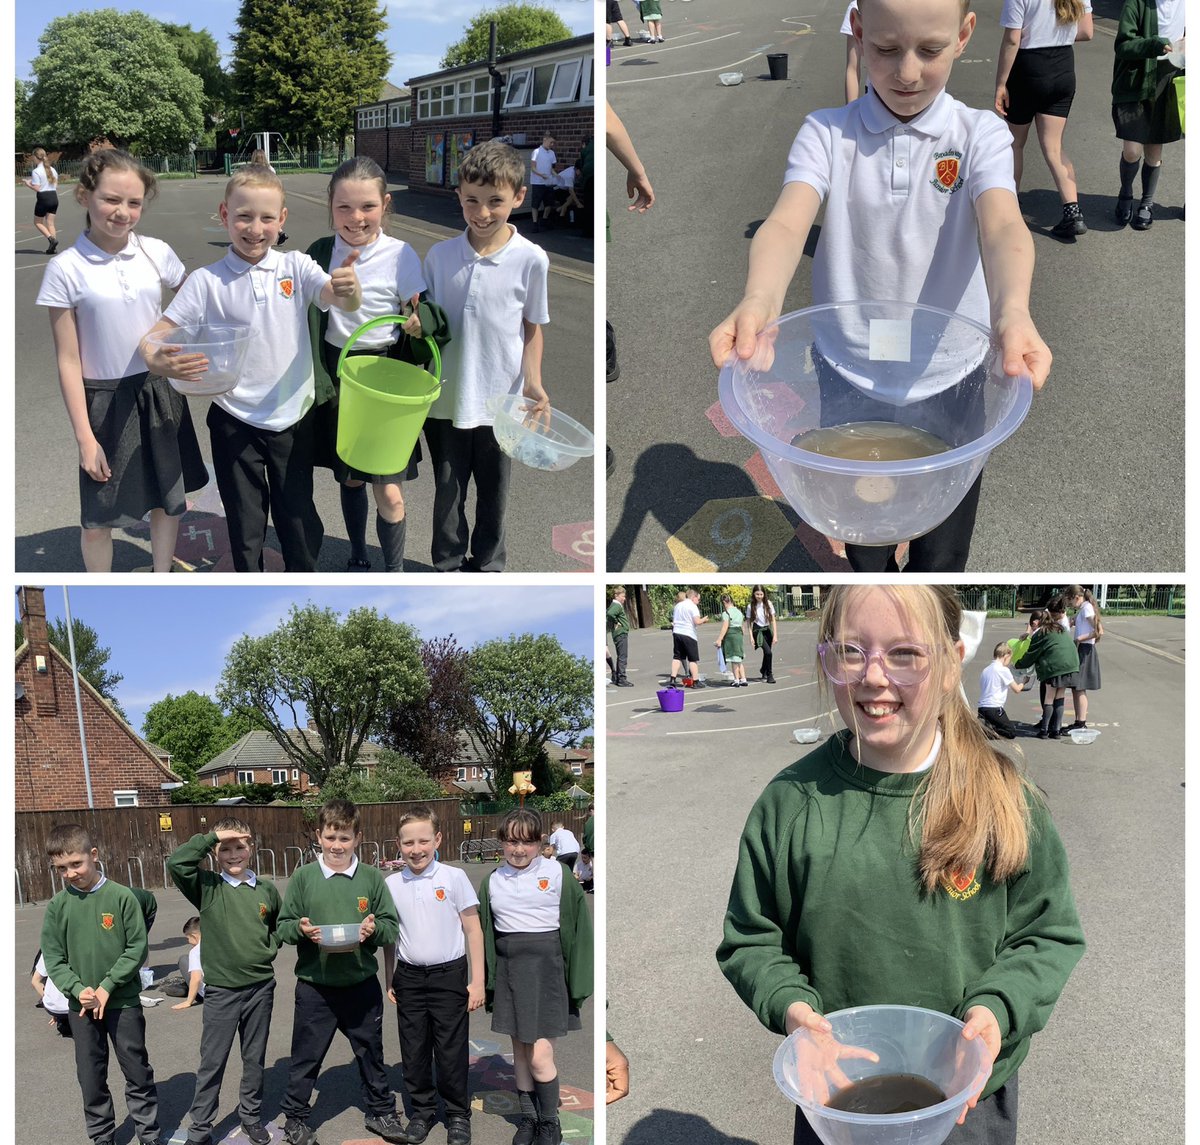 Scientists in 5ES spent the afternoon separating solids from liquids. They used a range of techniques to separate their mixture of stones, rice, soil and water. Fantastic team work today, Y5. #KeepLearning #TakeNotice #Wearescientists @broadwayjuniors